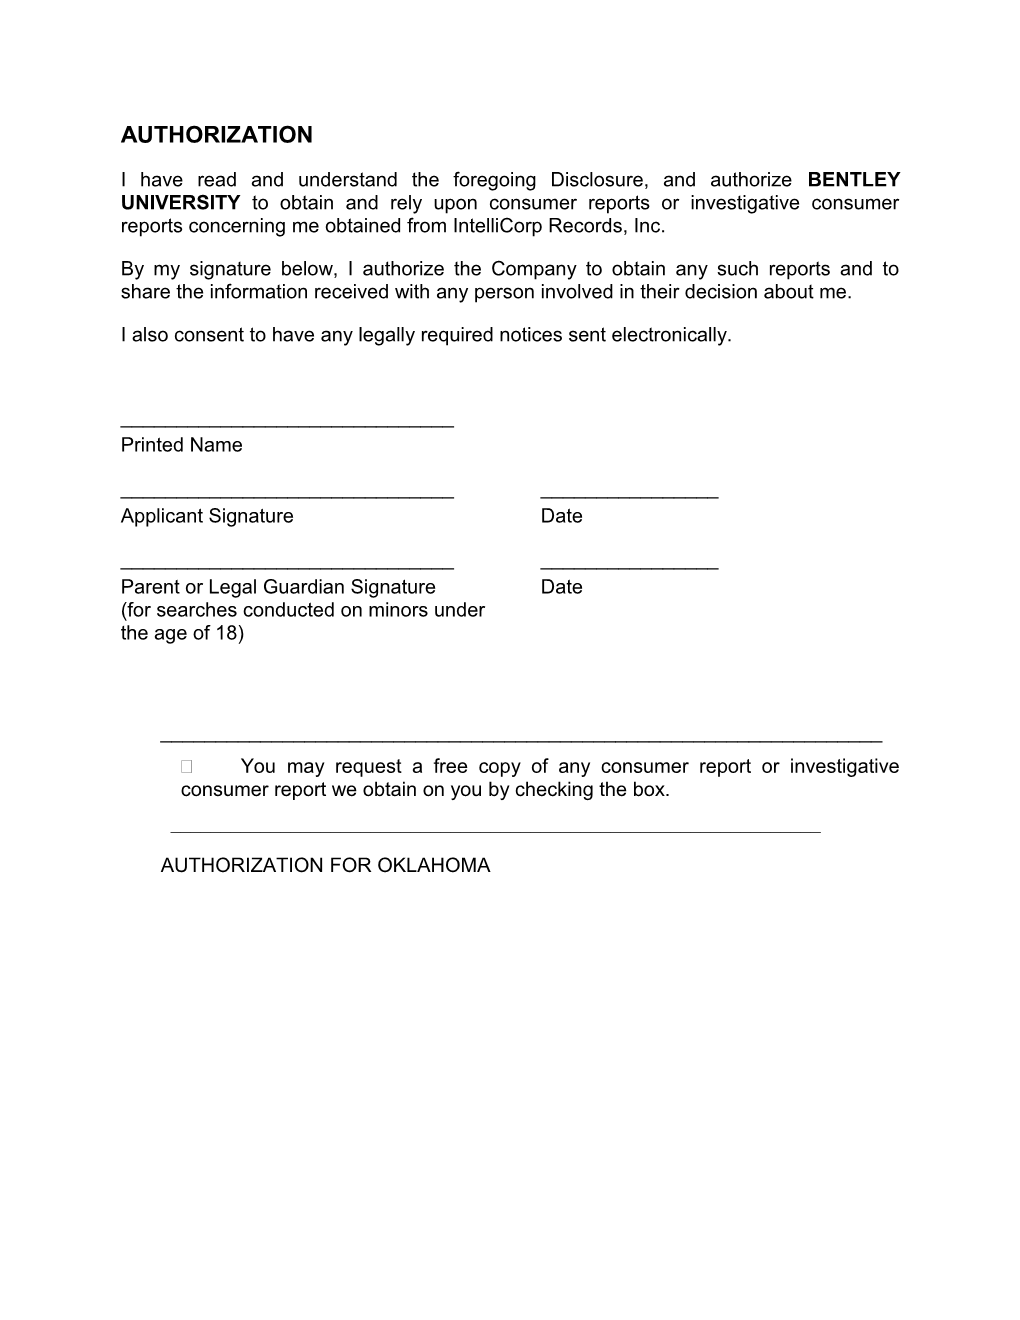 Disclosure Form to Obtain Consumer Reports for Employment Purposes